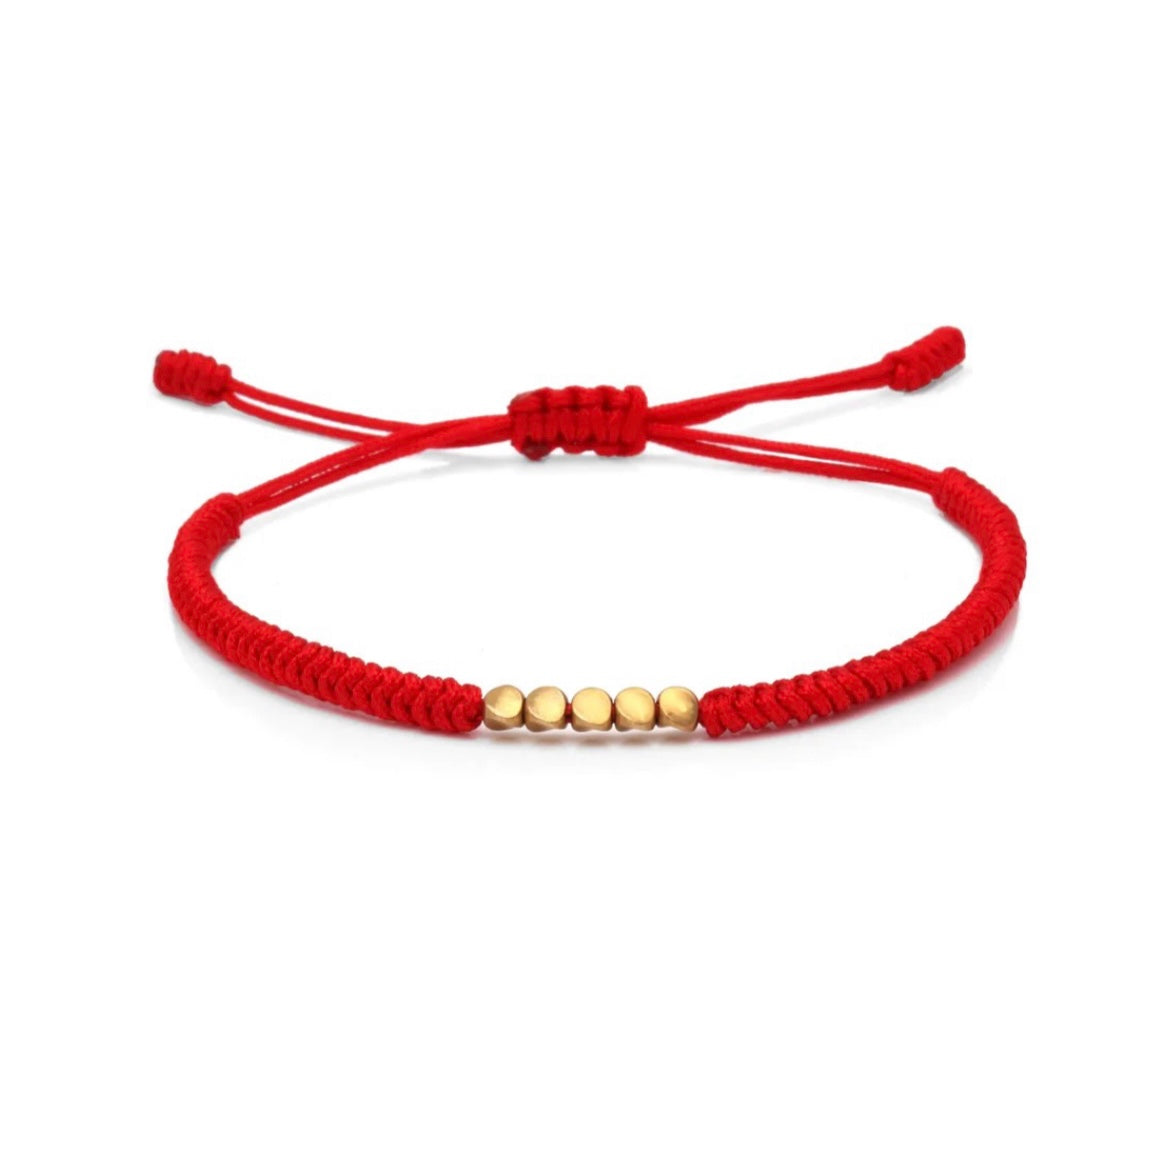 Gold Beads Red String Protection Bracelet - My Harmony Tree